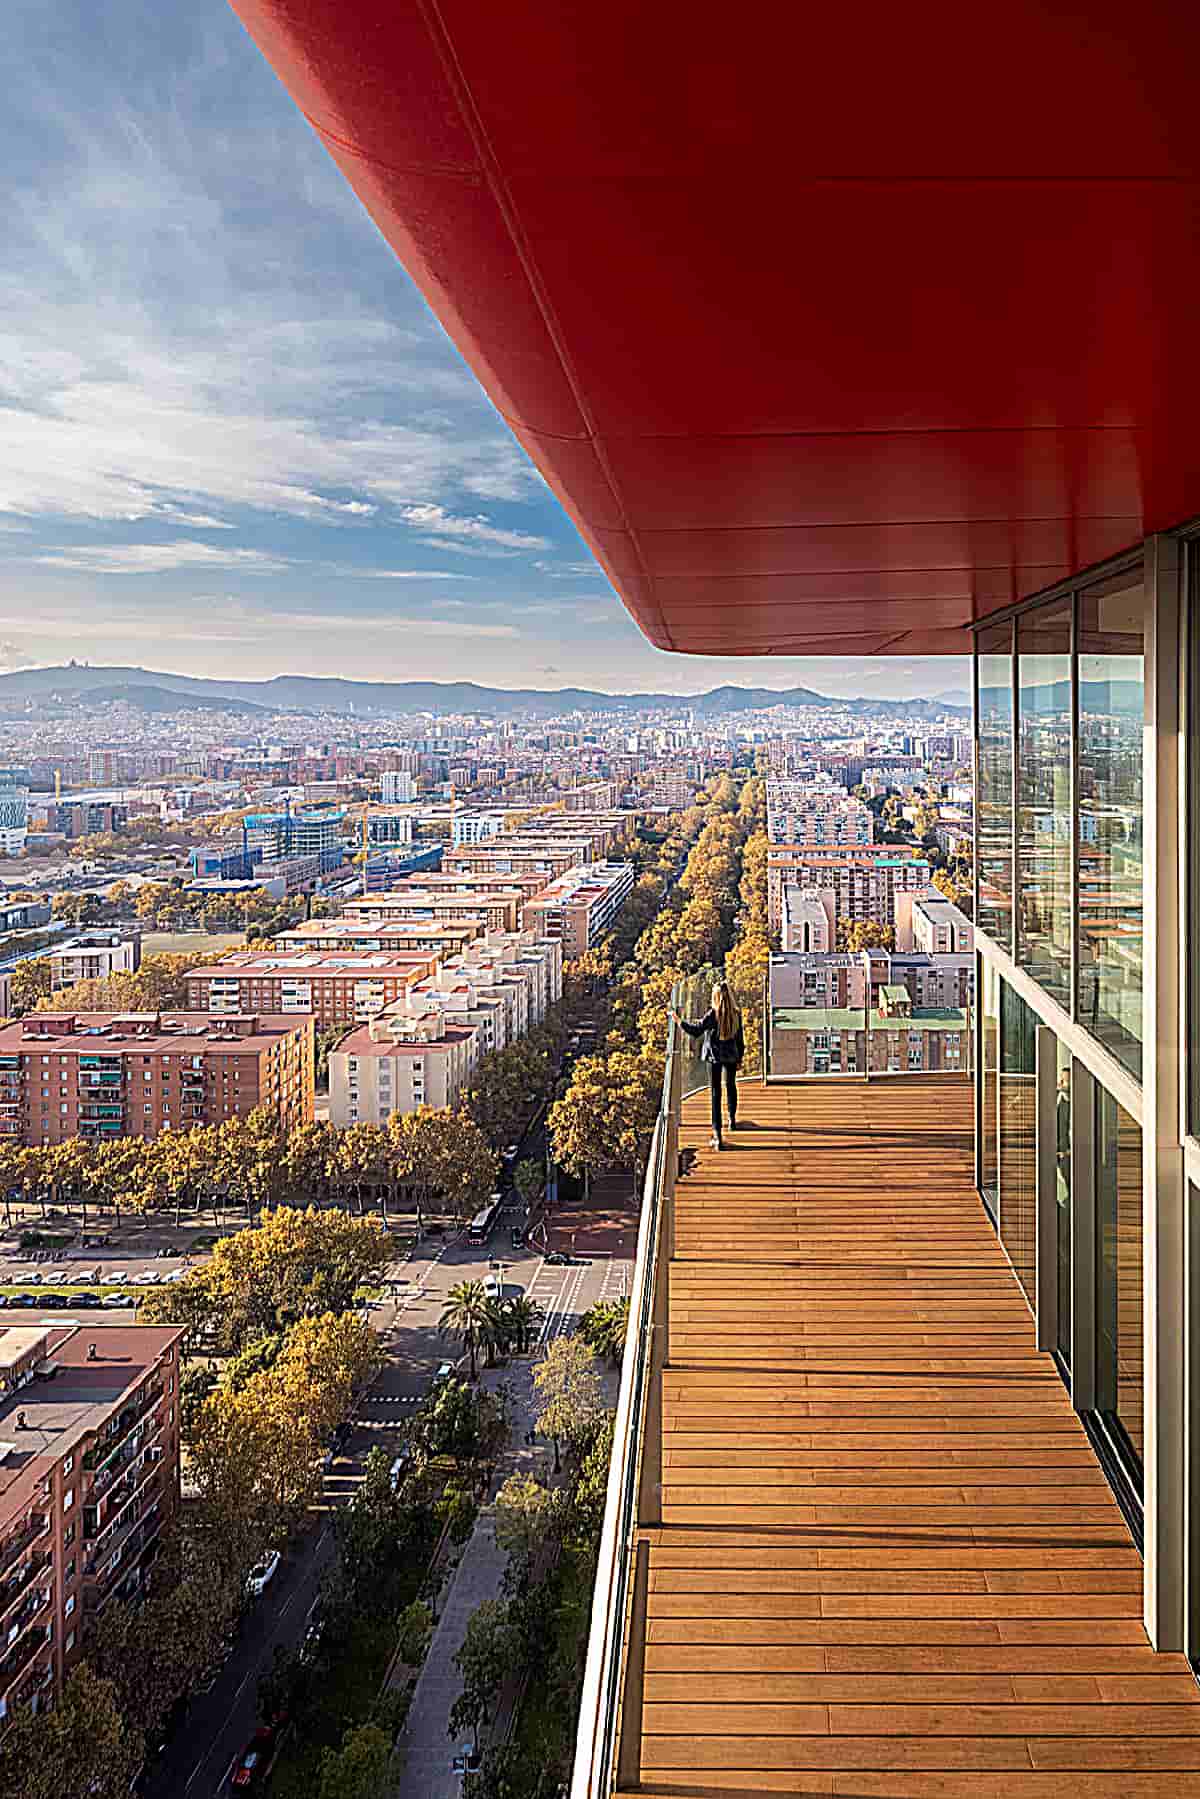 Constraints are An Architect's Challenge, Reshapes Barcelona’s Skyline with a Sculptural High-Rise that Echoes the City's Dynamism